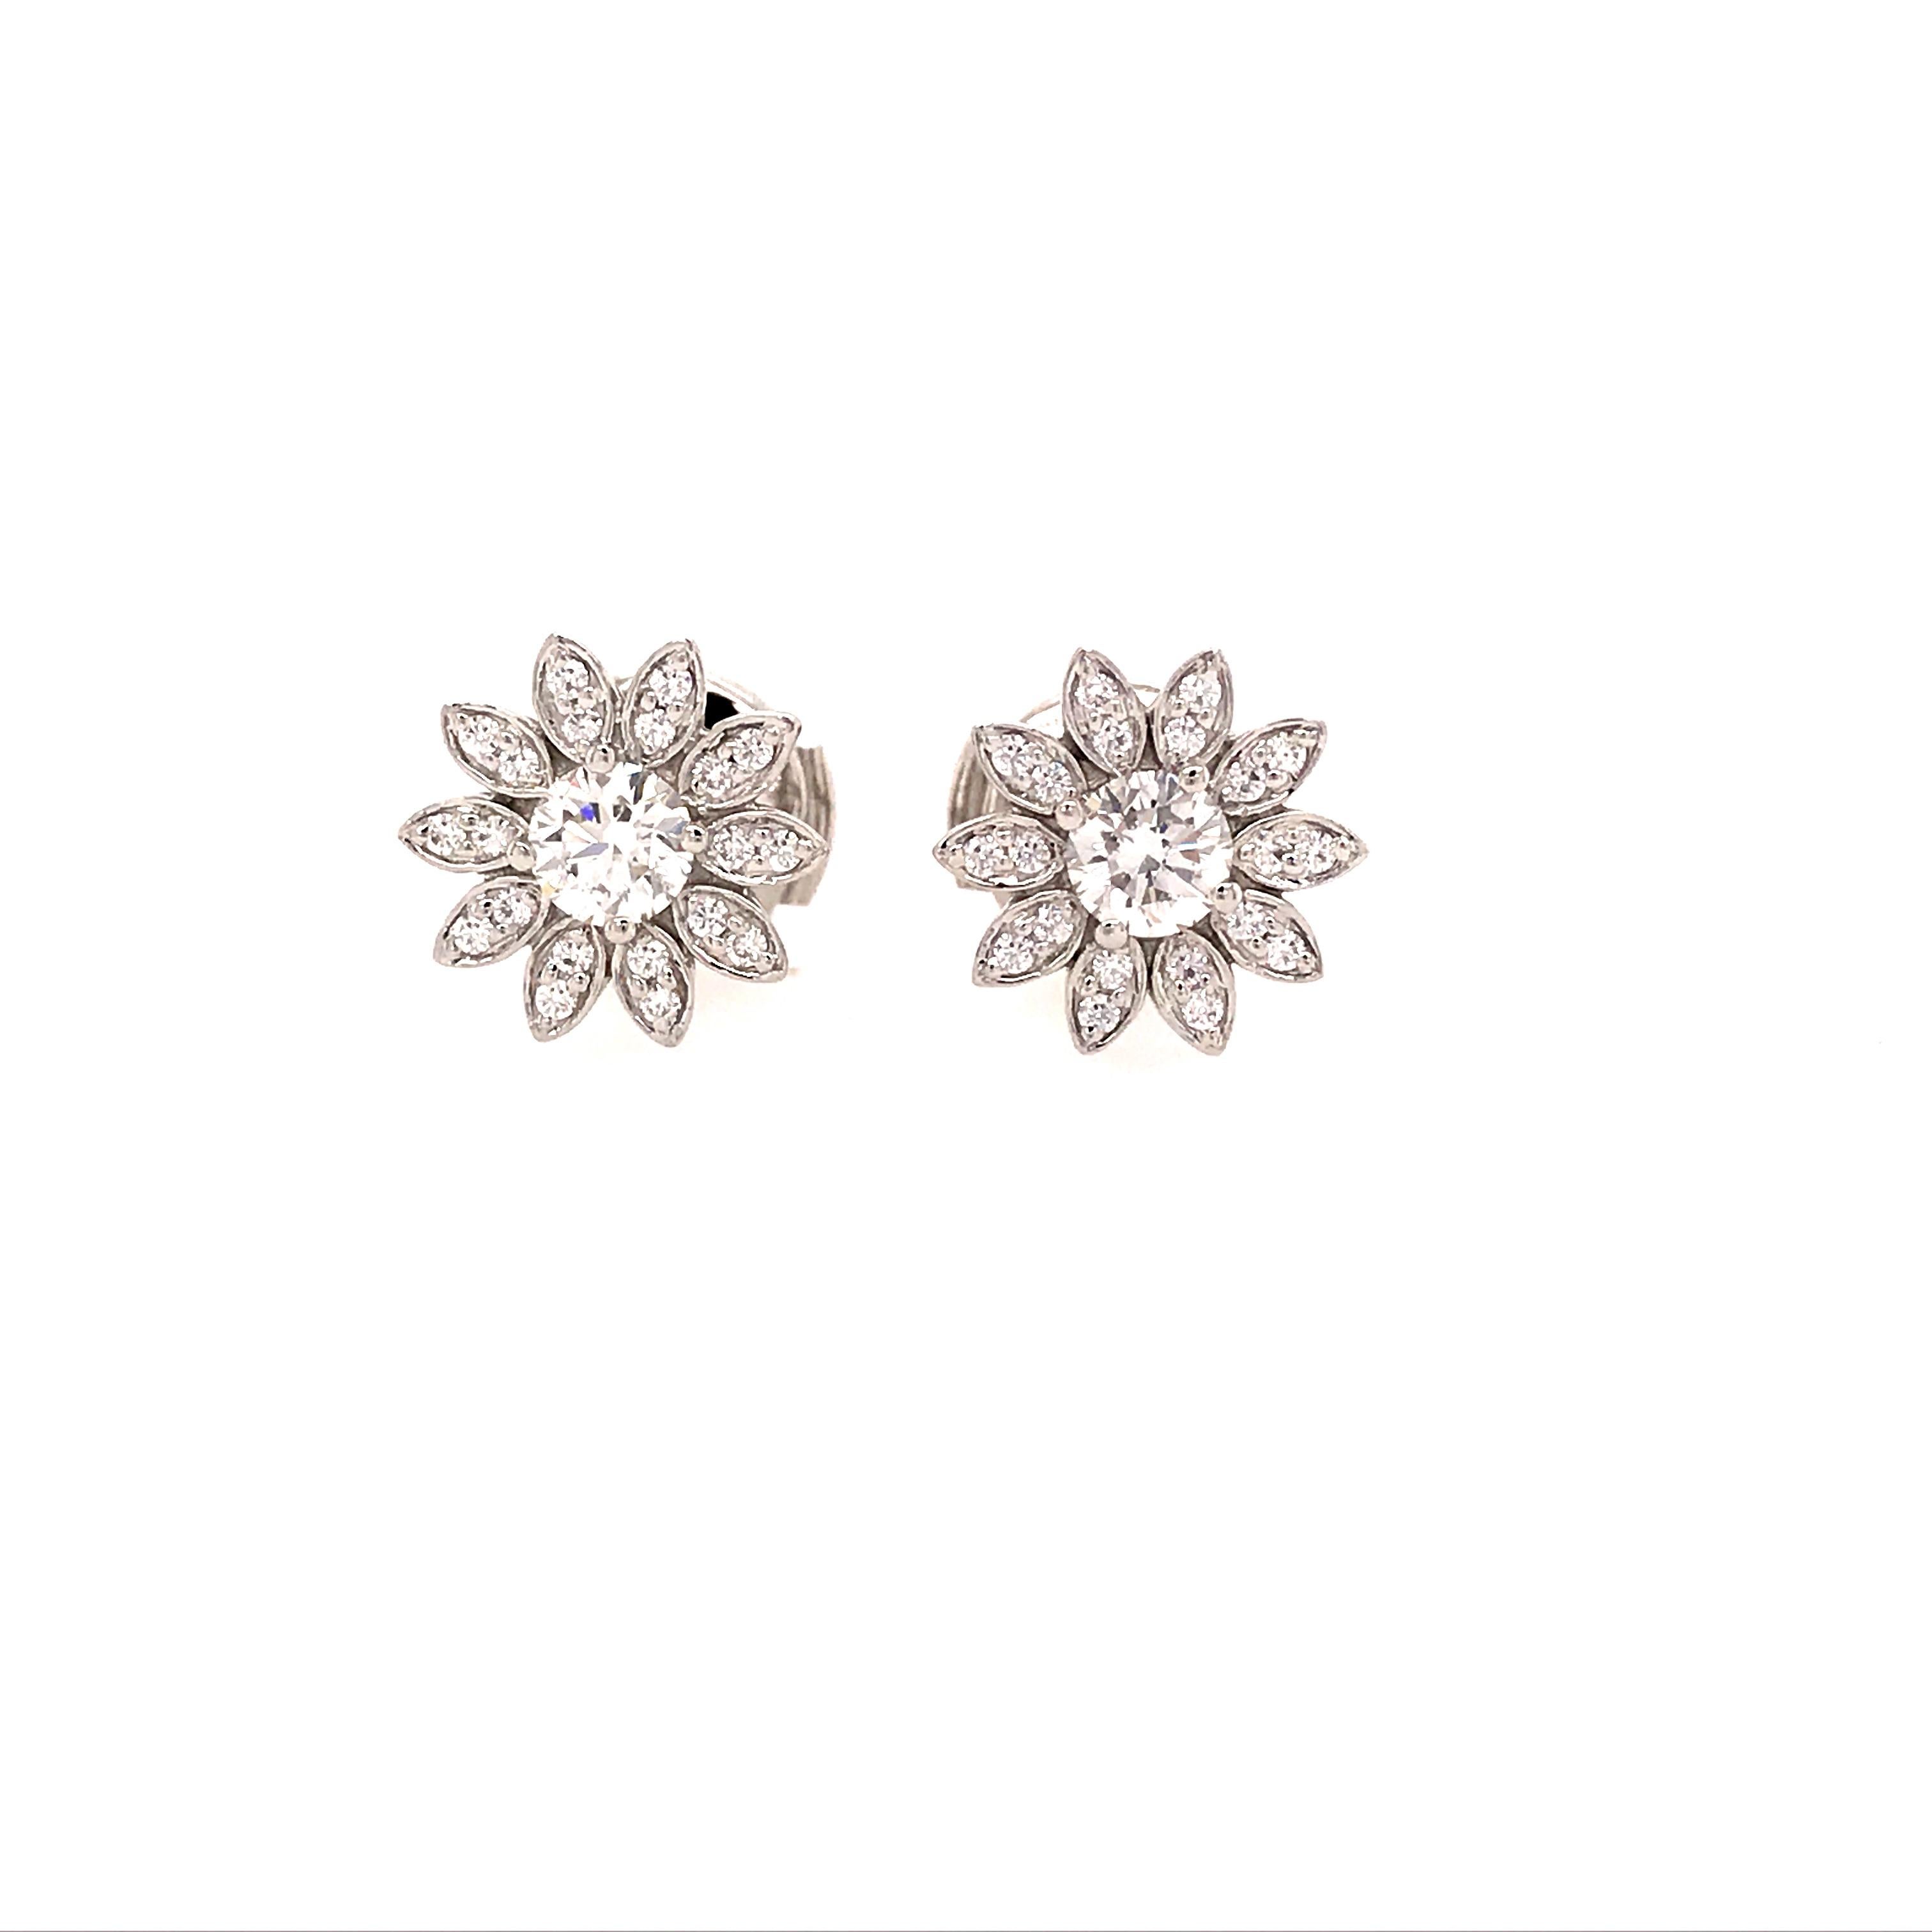 Tiffany & Co. Enchant Diamond flower earrings in Platinum. Expertly set with (42) Round Brilliant Cut Diamonds weighing .50 carat total weight, G-H in color and VS in clarity.  The earrings measure 3/8 inch in diameter and weigh 3.75 grams.  Stamped